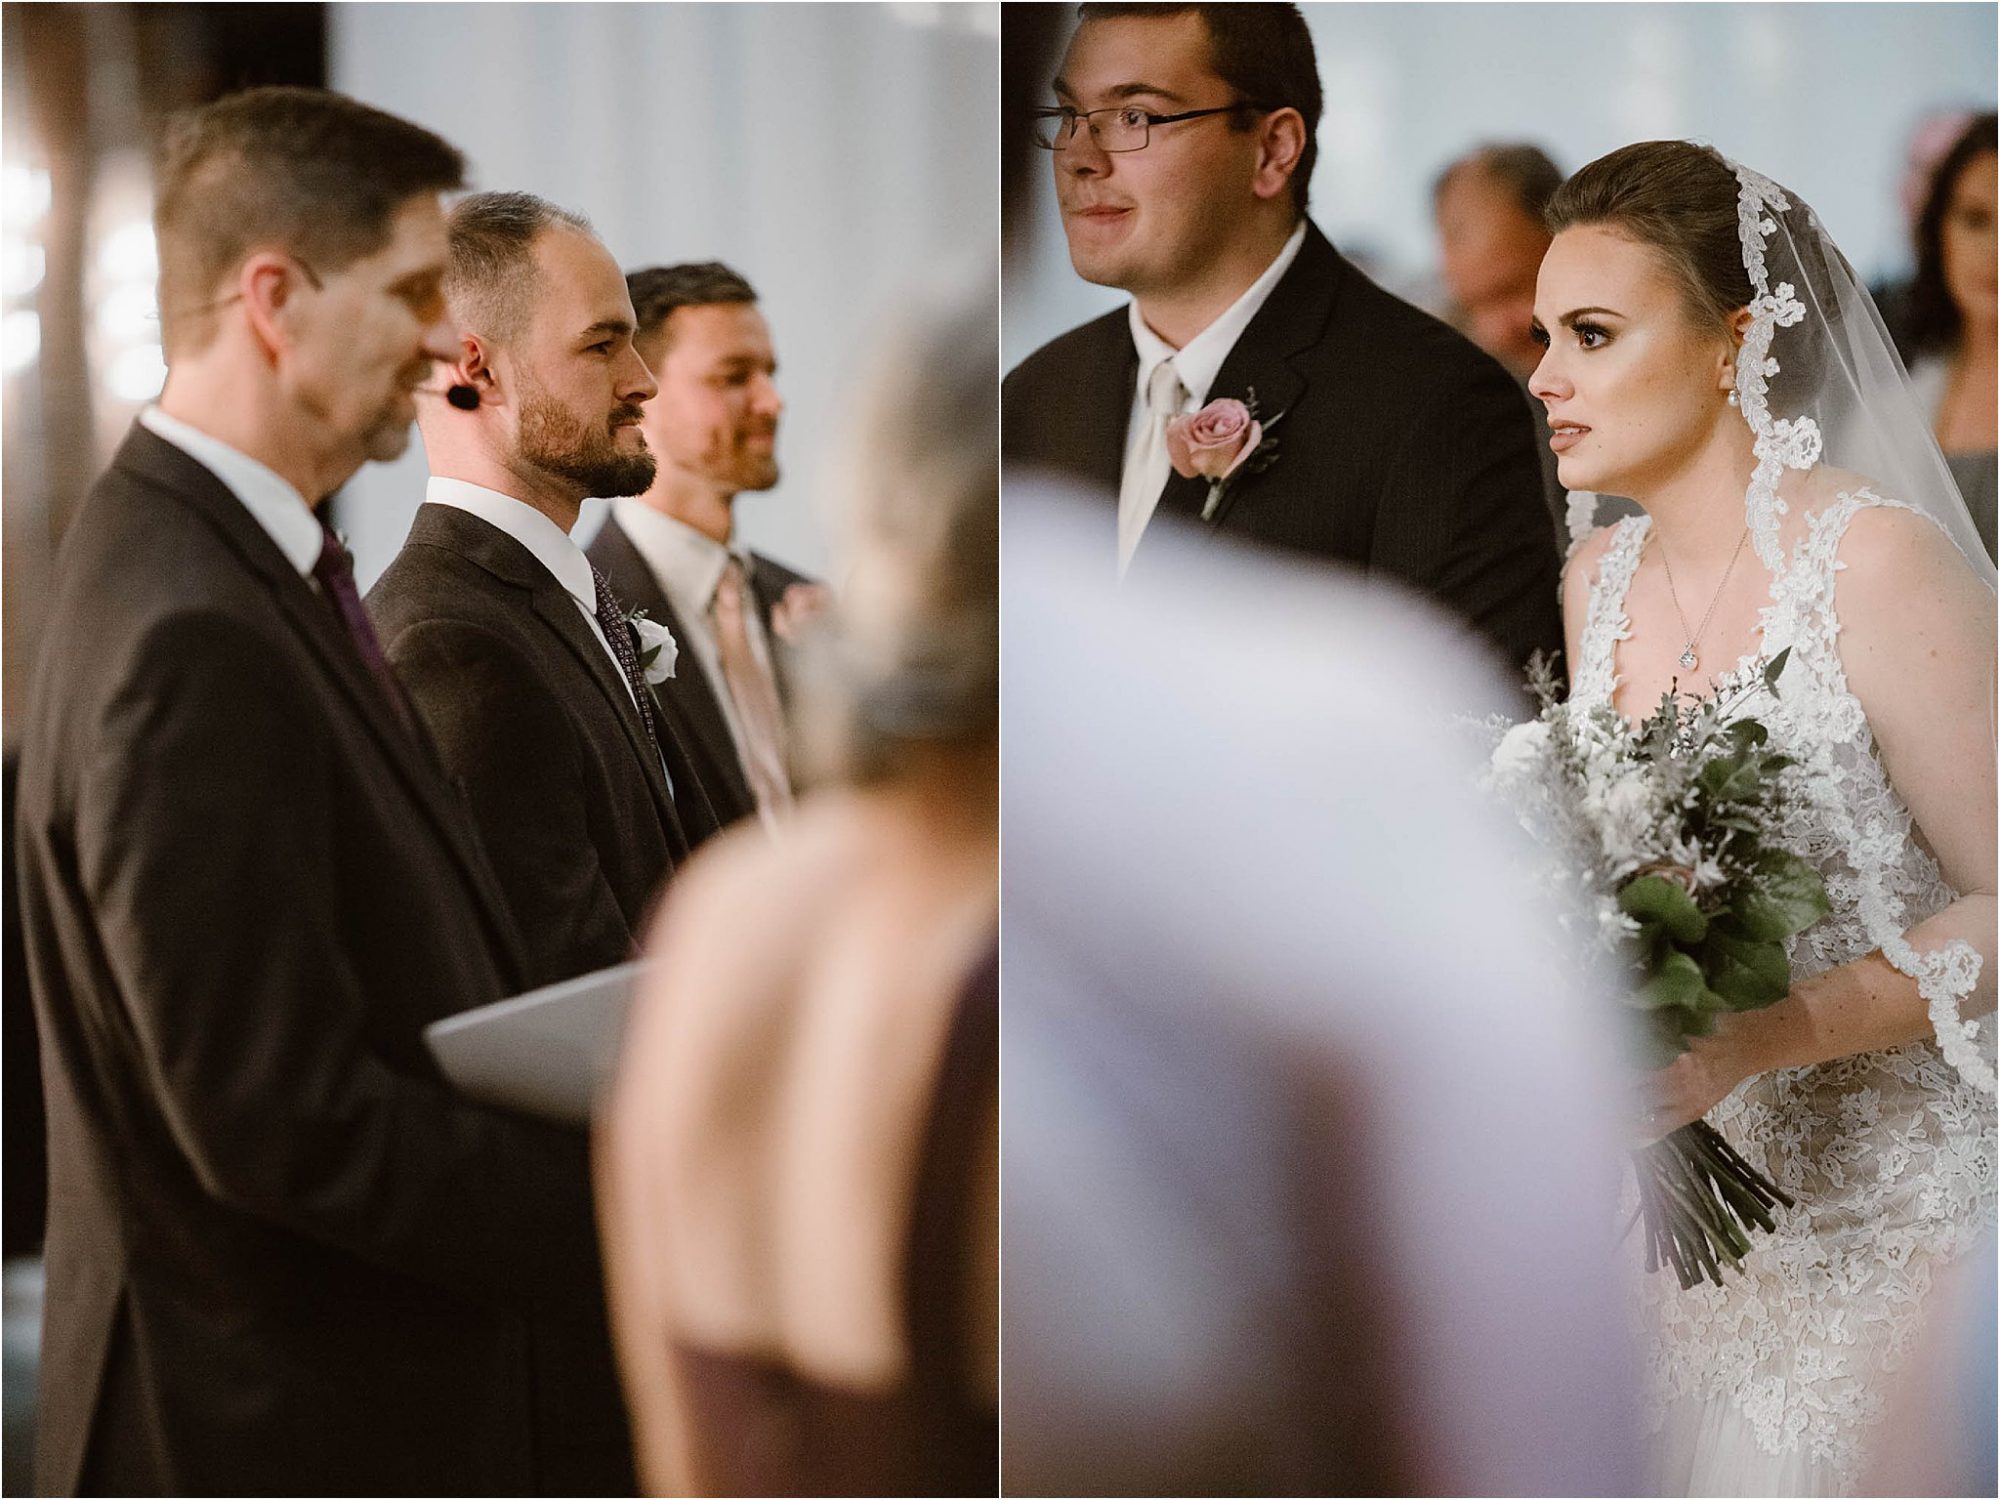 bride and groom seeing each other at aisle on wedding day